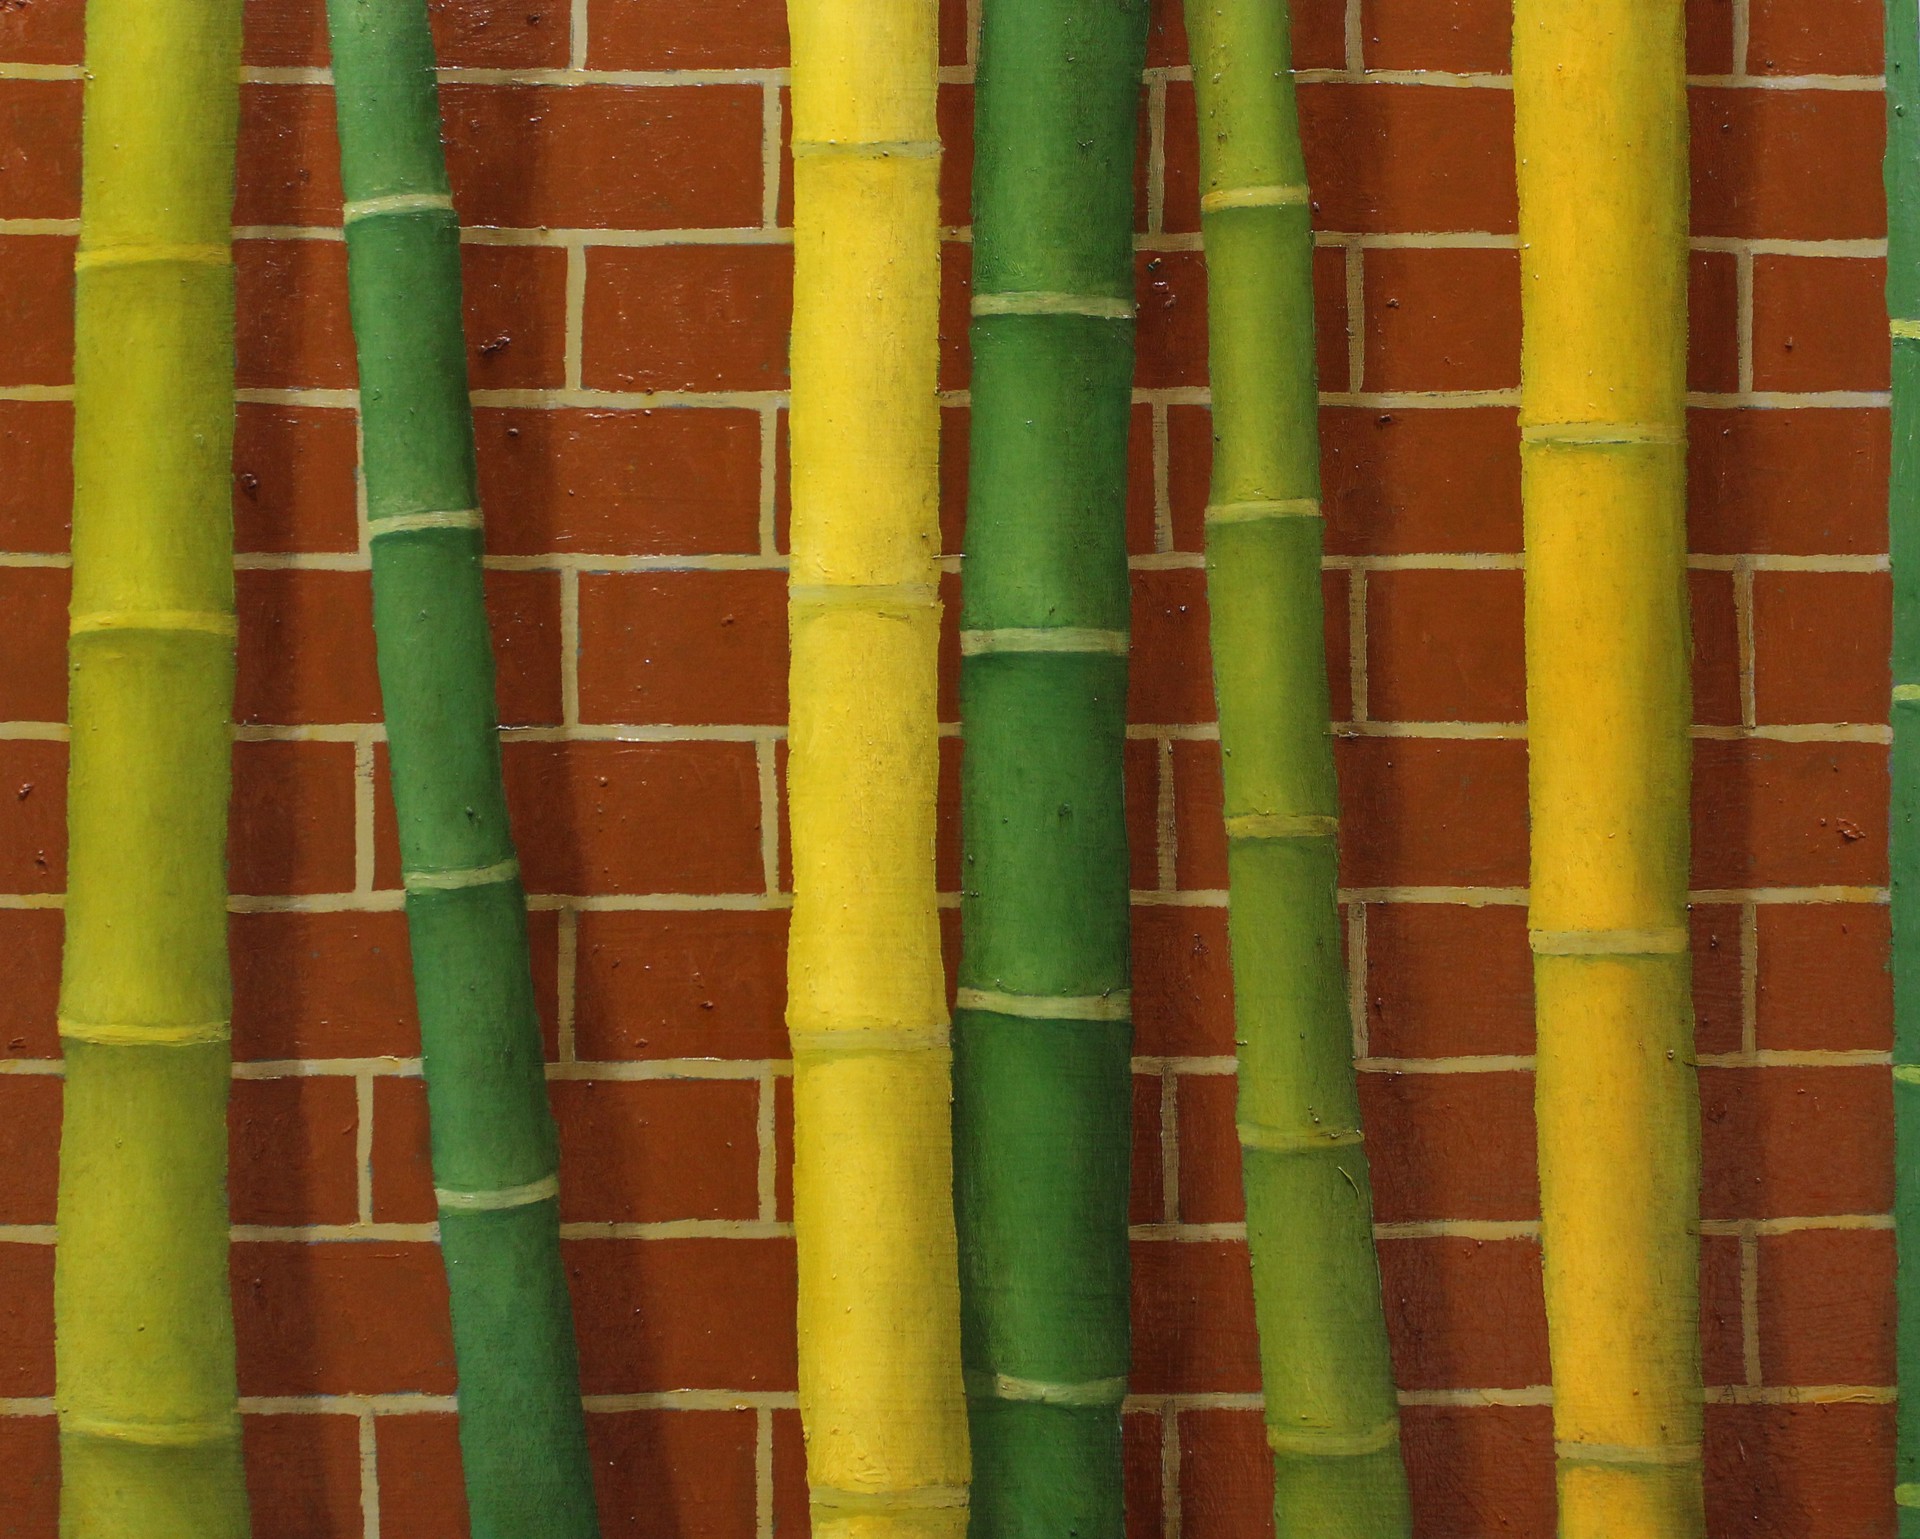 Bamboo and Brick by Alan Gerson